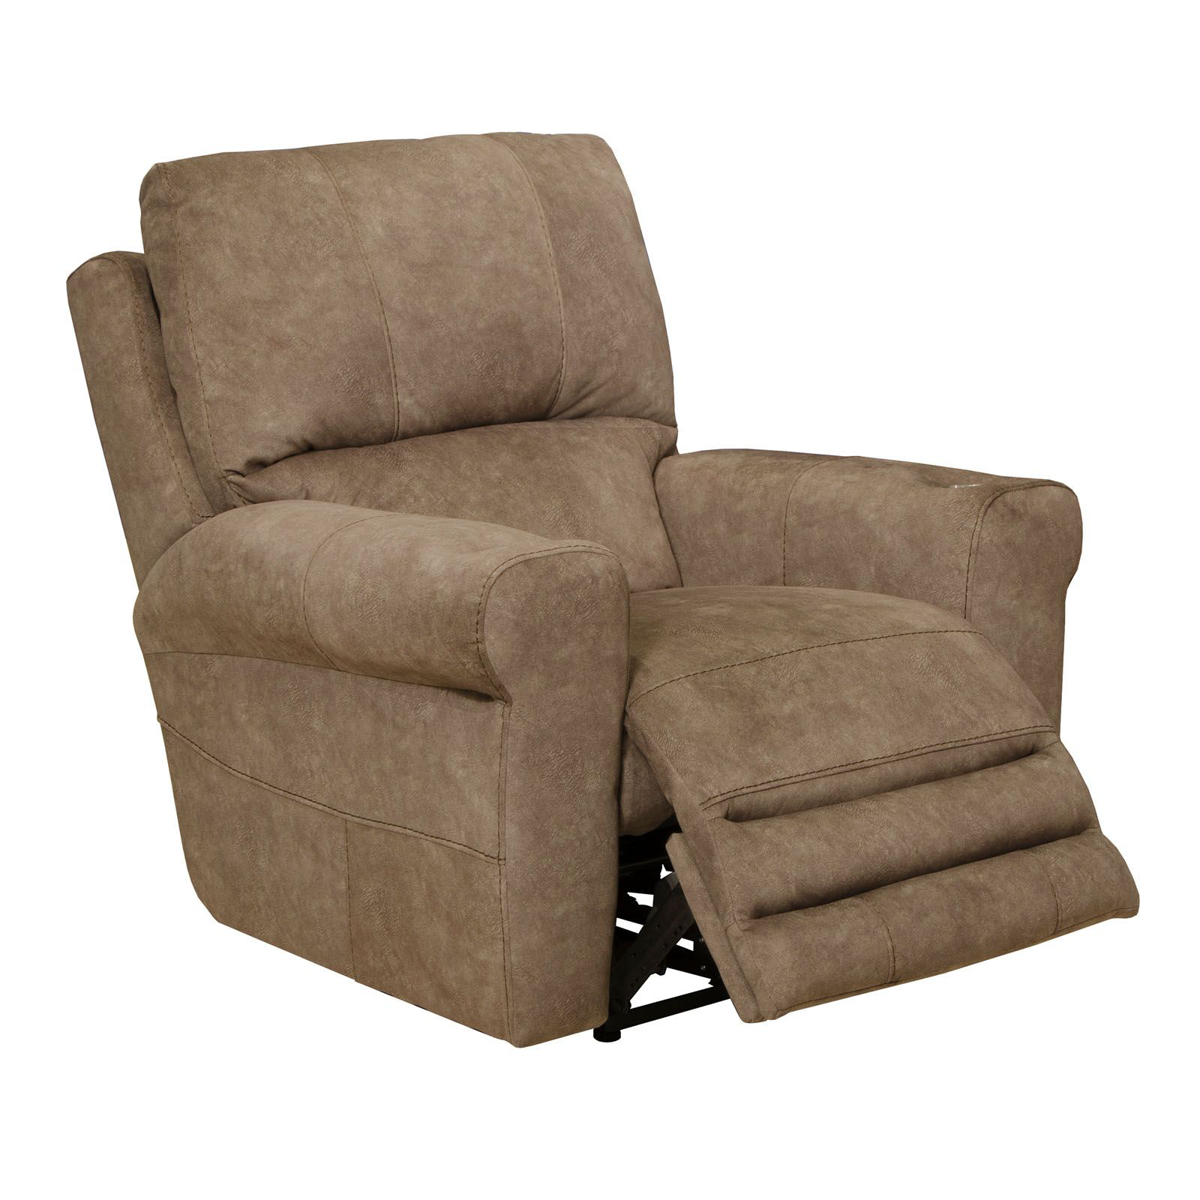 Picture of Vance Portabella Voice Power Recliner